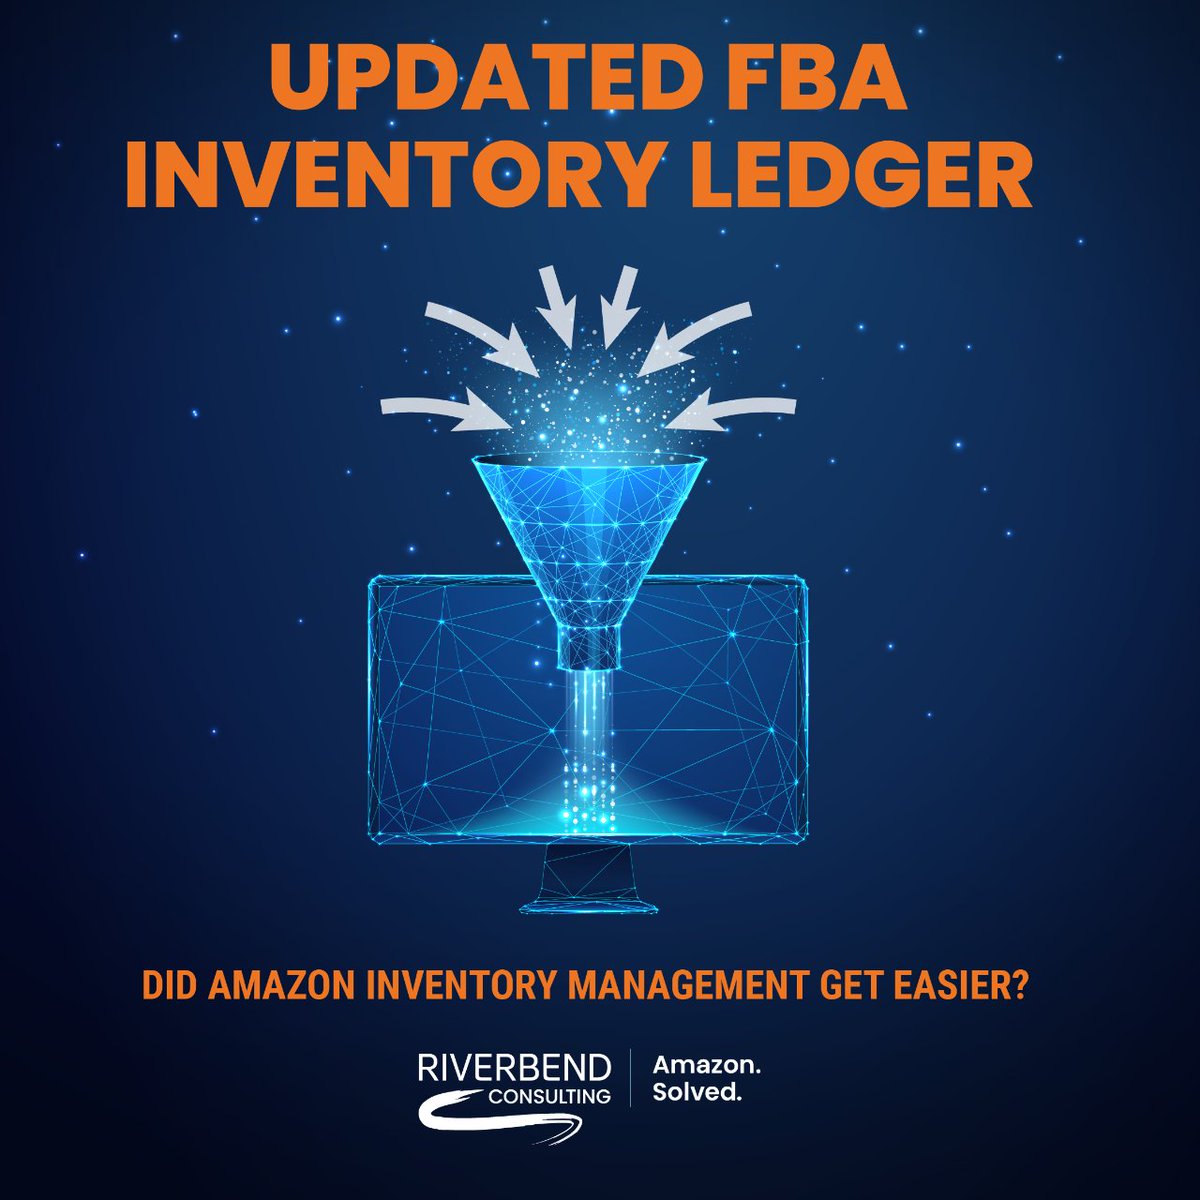 Have you used Amazon's new Inventory Ledger? Get the details here, and tell us what you think. 💬 Is it easier to use, or more difficult? 🤔

🔗: riverbendconsulting.com/blog/fba-inven…

#FBAInventoryLedger #AmazonInventory #inventoryledgerupdate #amazonsolved #amazonsellers #riverbendconsulting